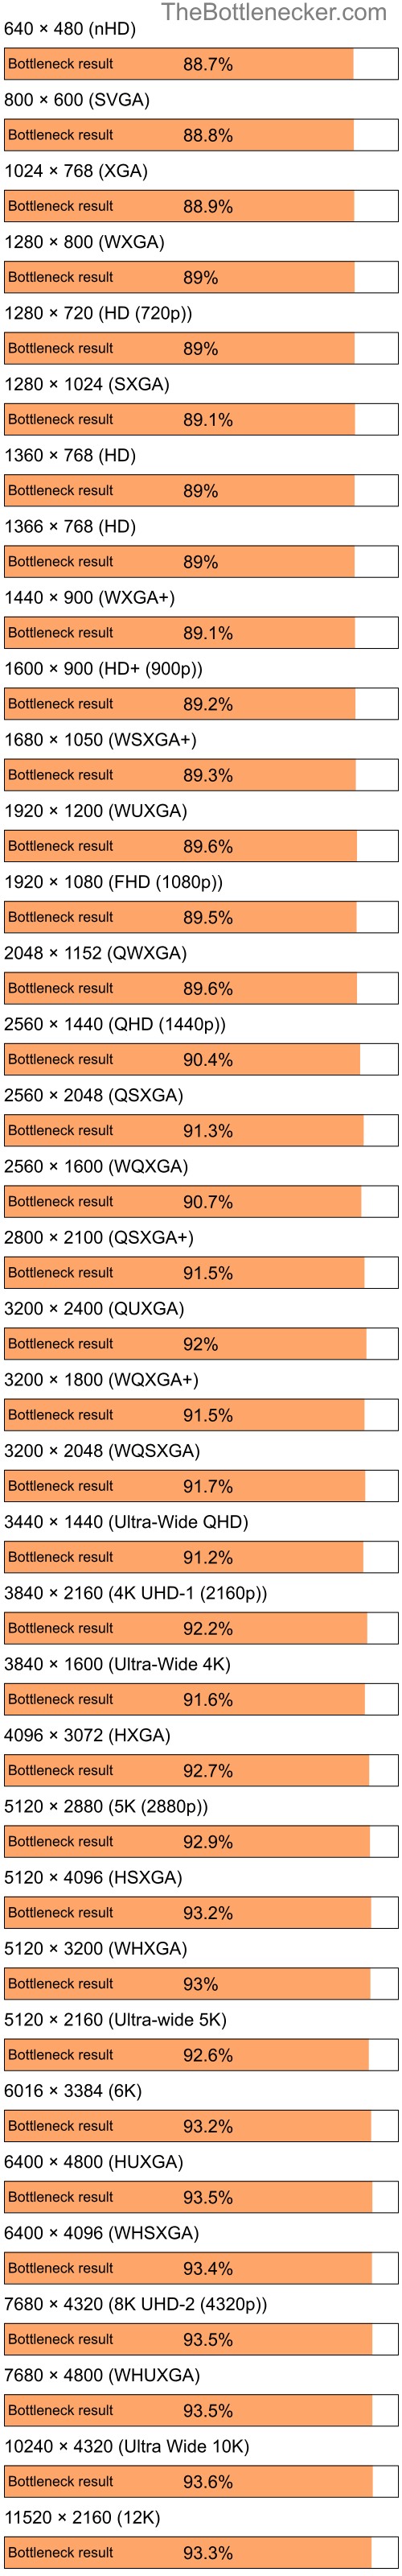 Bottleneck results by resolution for Intel Pentium 4 and NVIDIA GeForce4 MX 420 in General Tasks